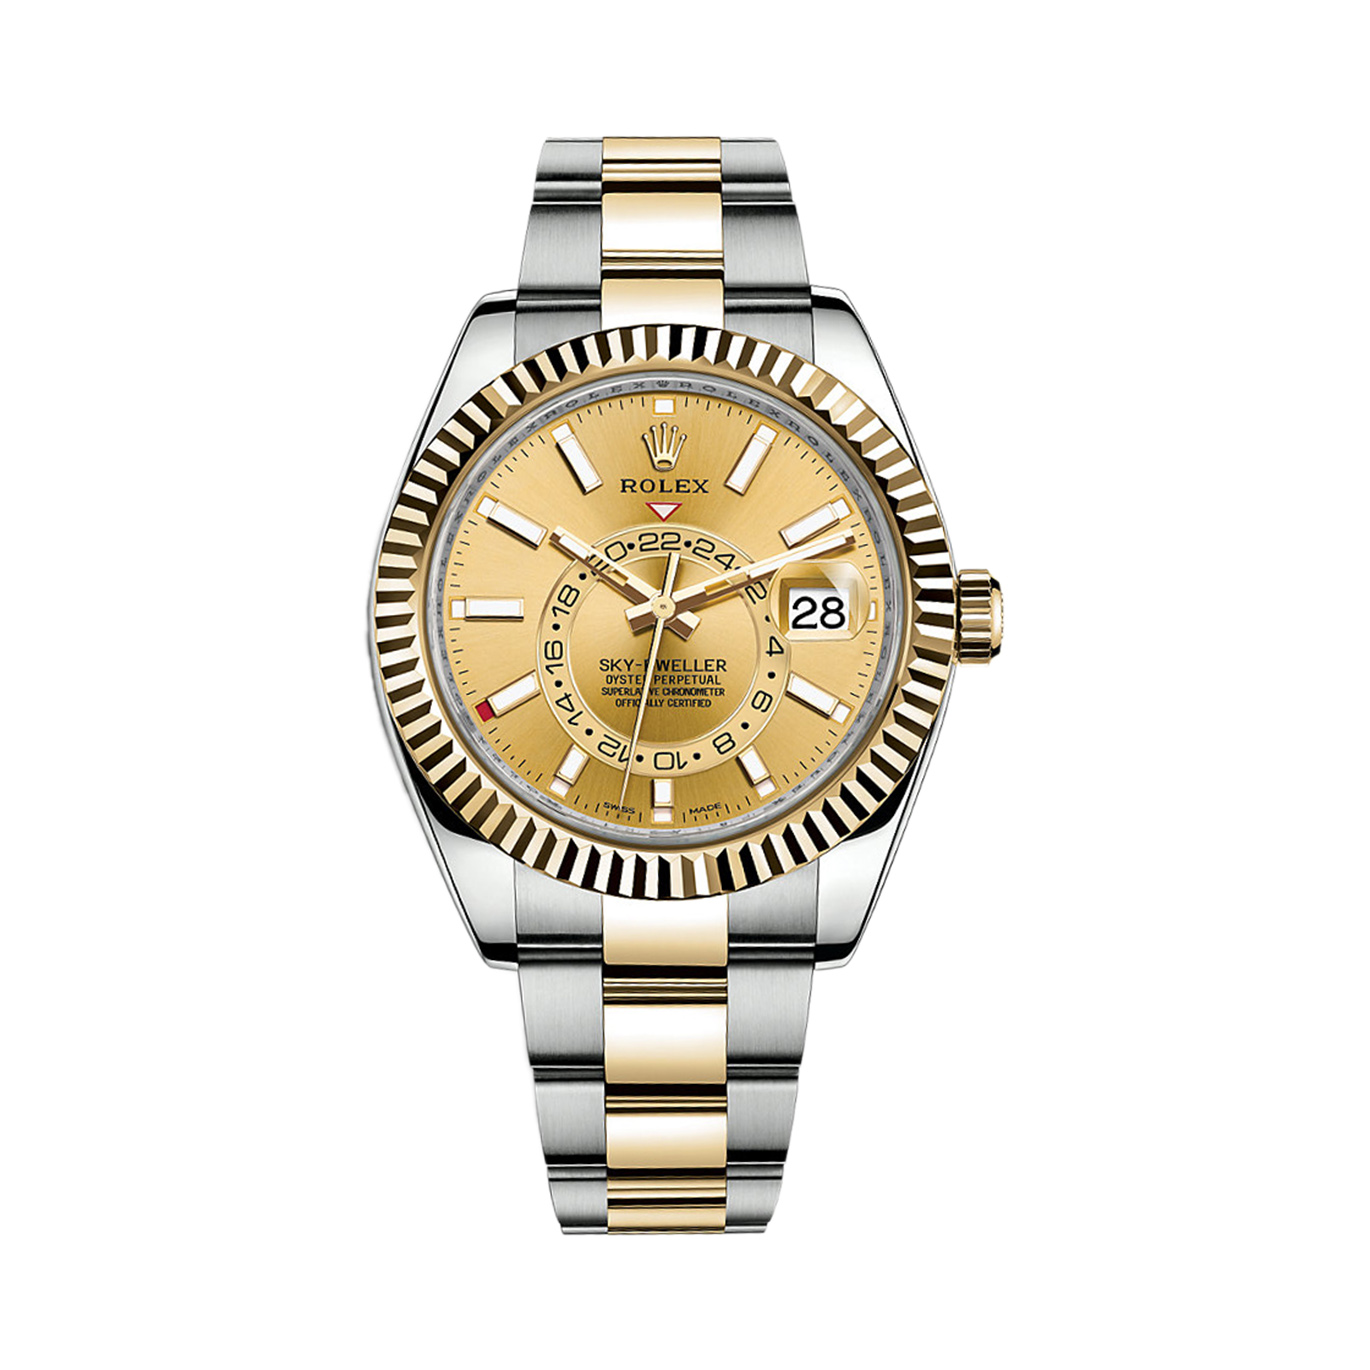 Sky-Dweller 326933 Yellow Gold & Stainless Steel Watch (Champagne)